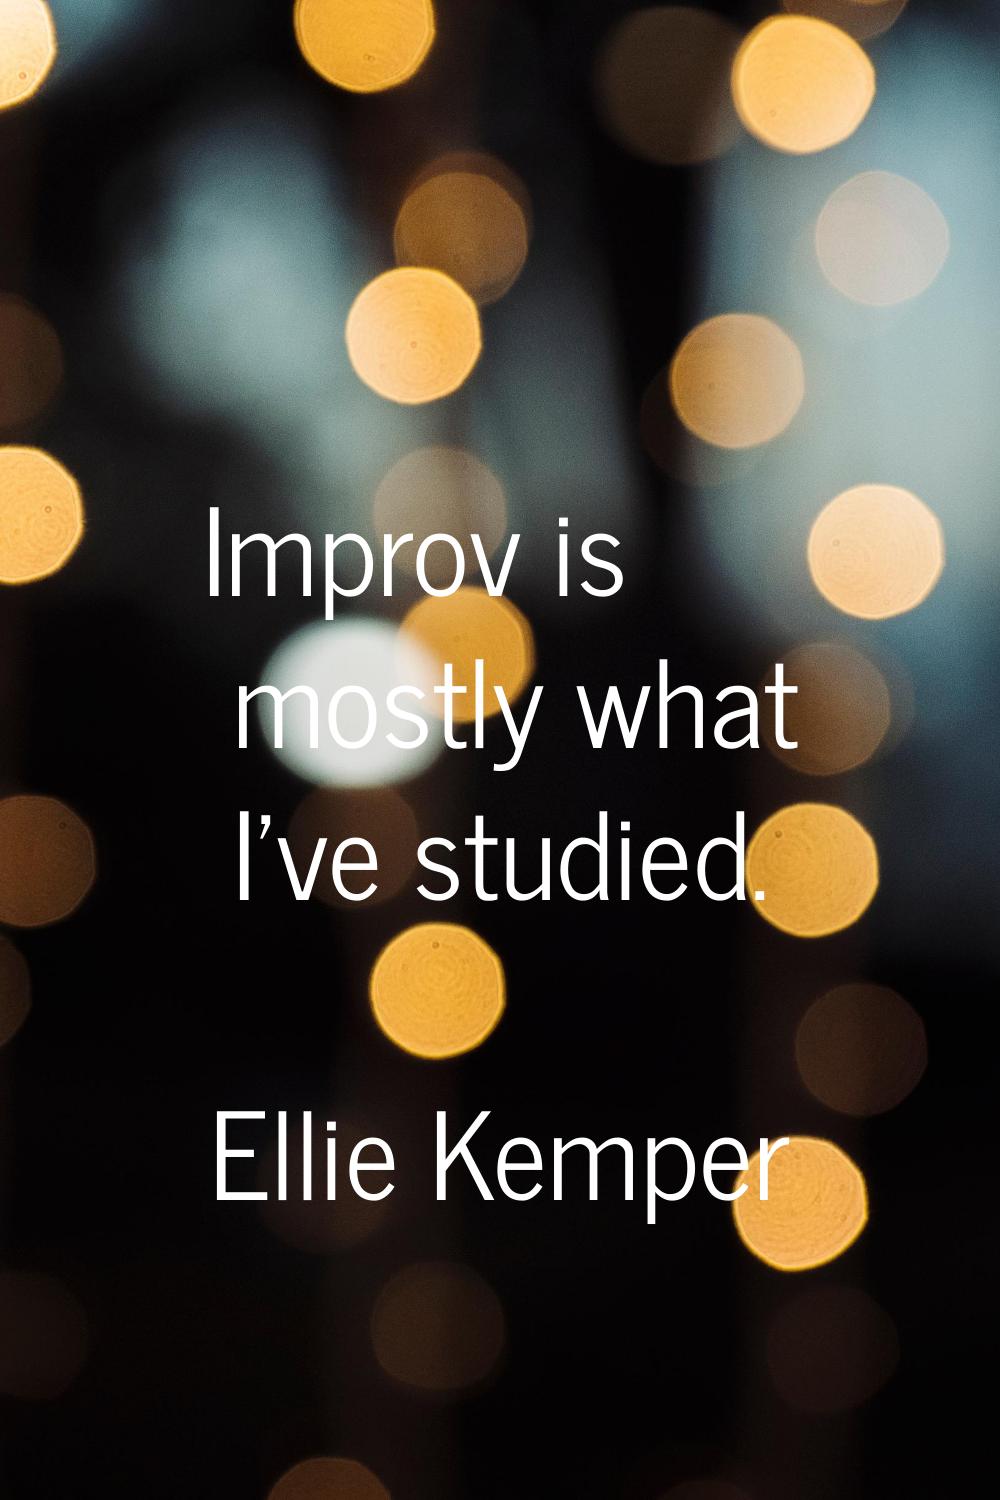 Improv is mostly what I've studied.